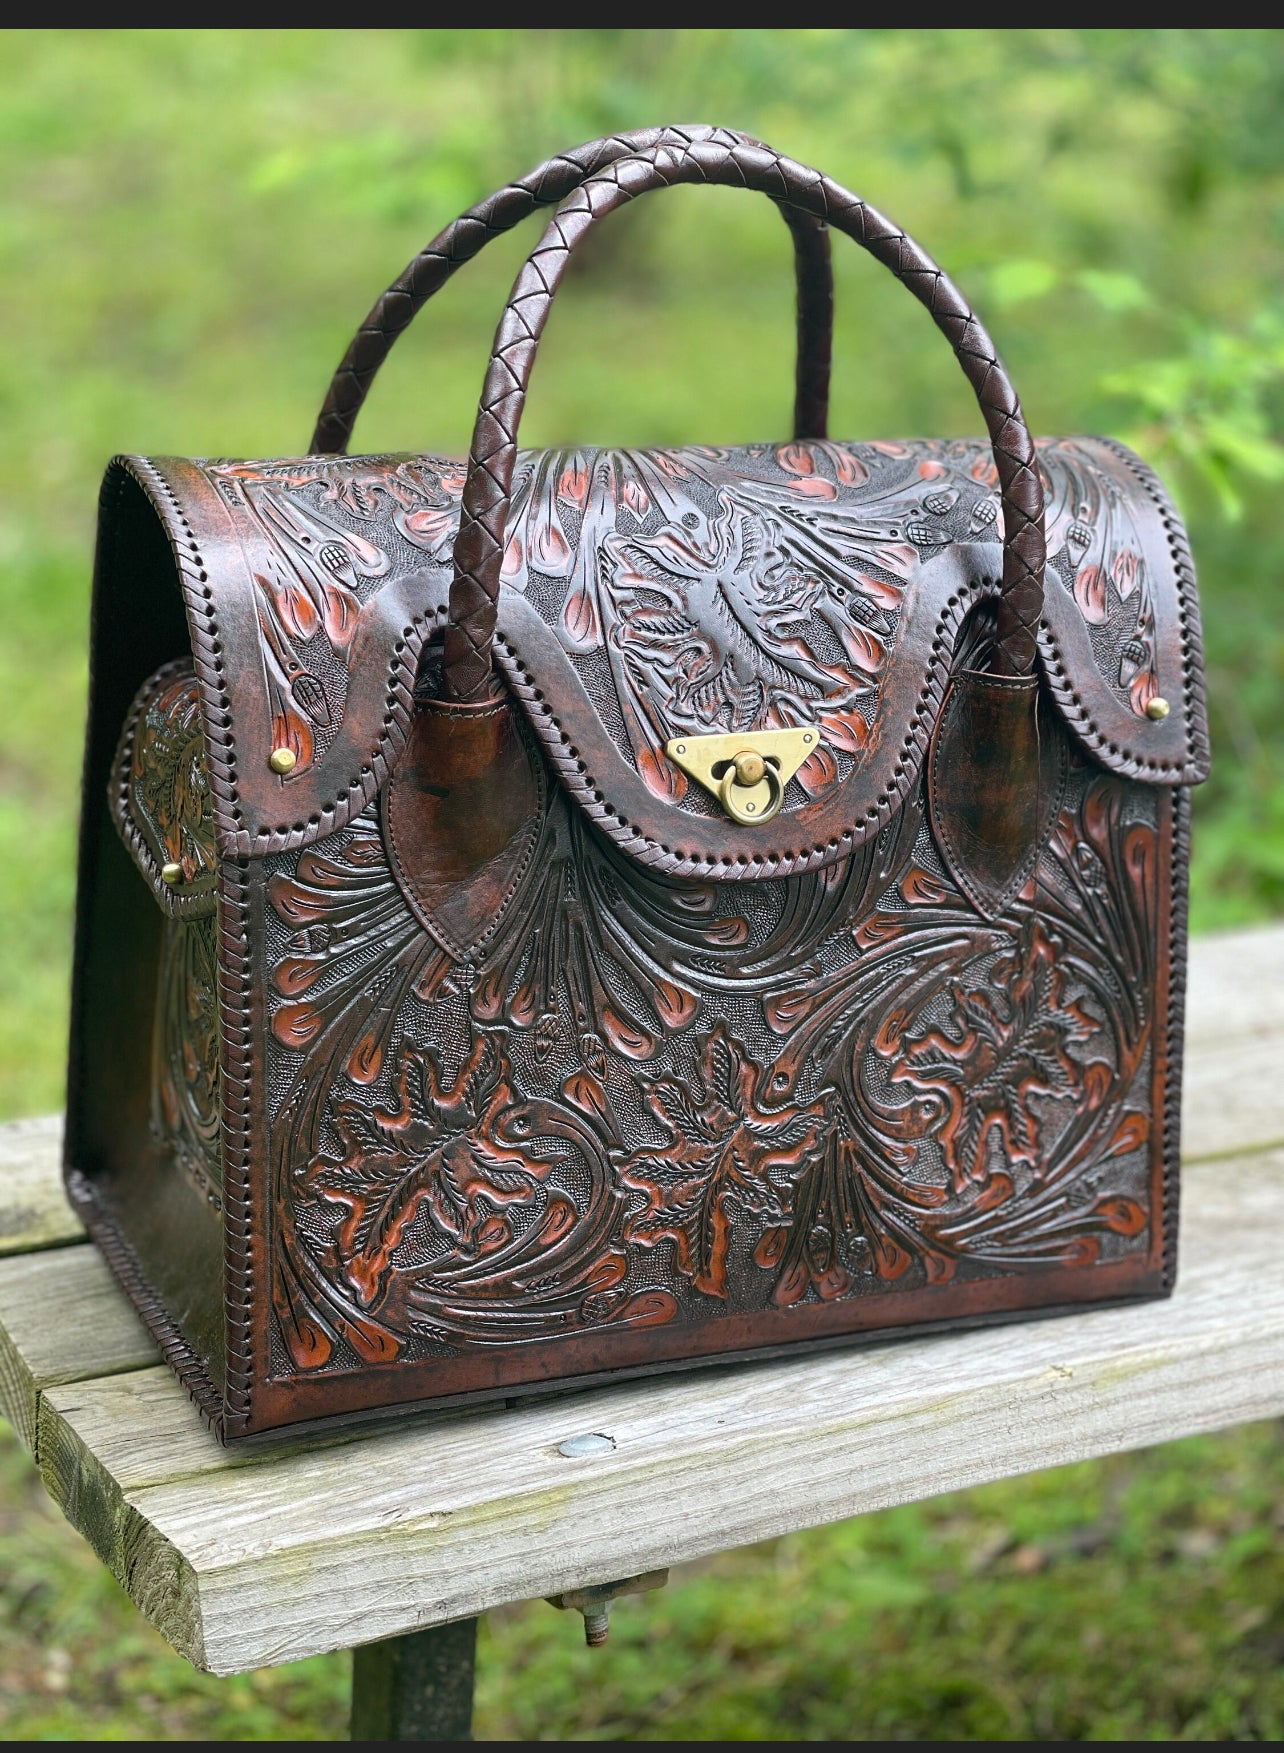 ALLE Best Hand-tooled leather handbags - Unique Designs - $30 Off